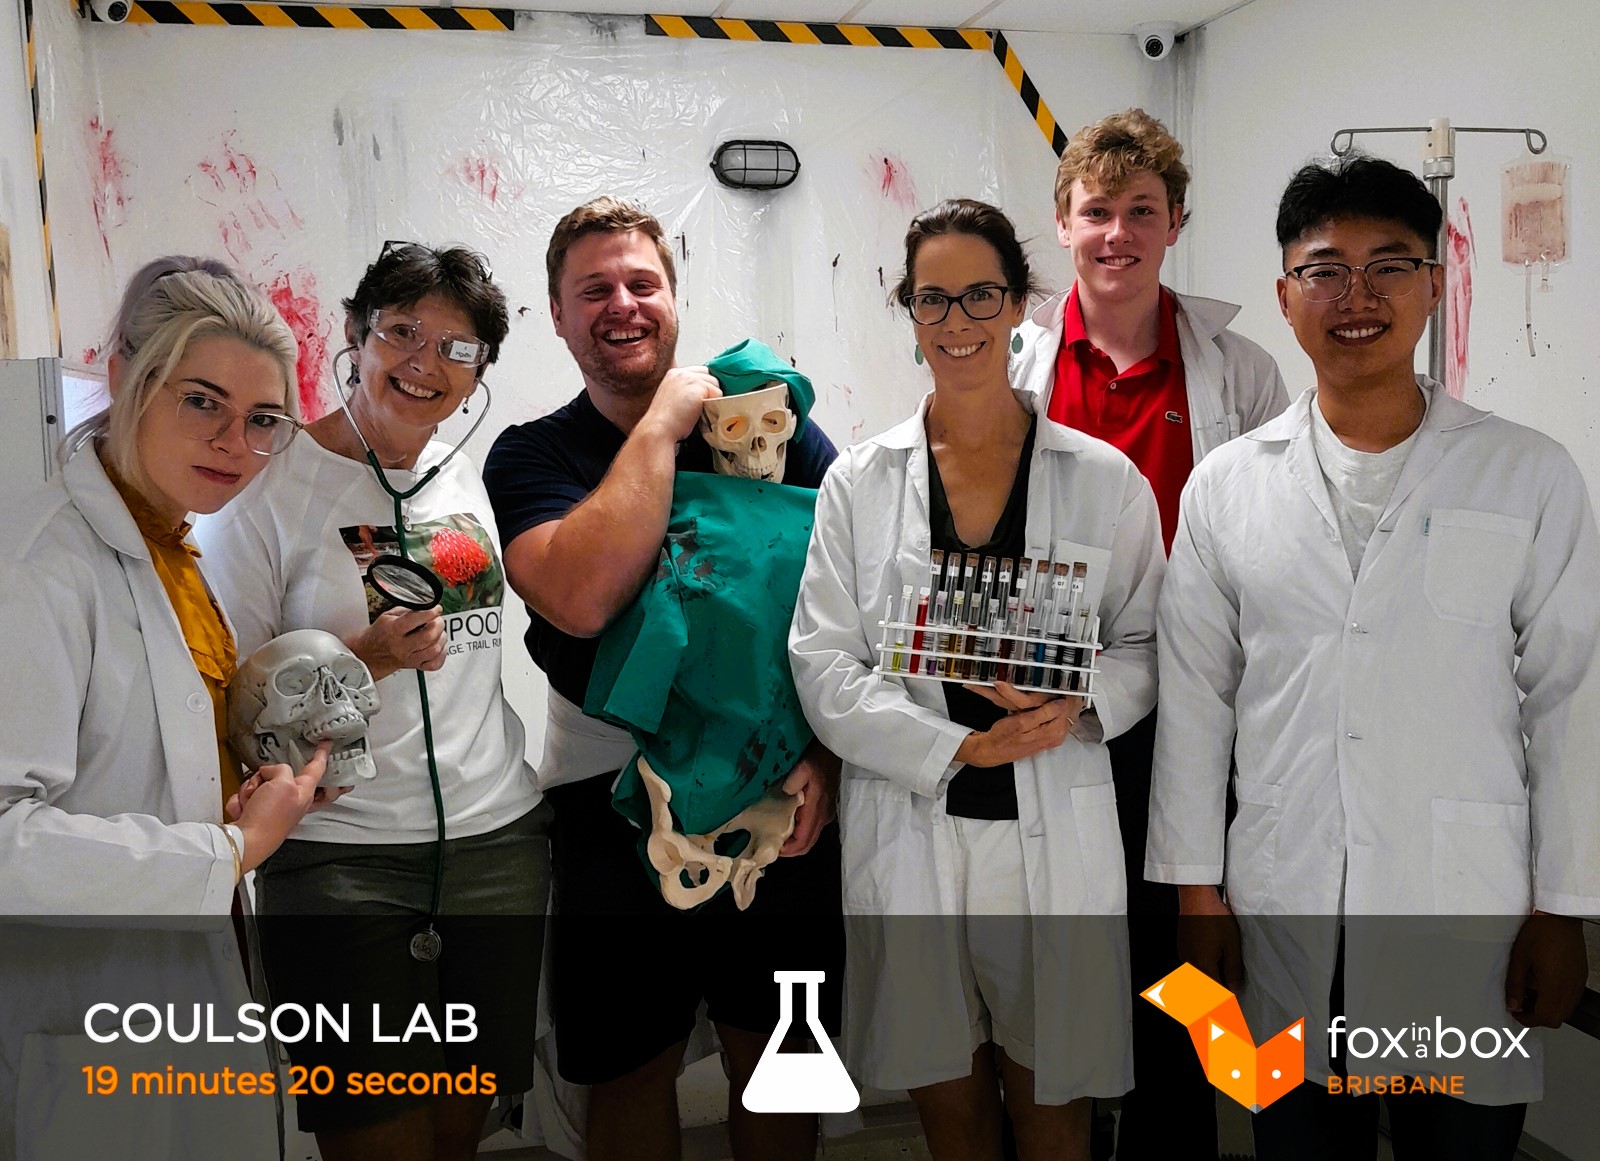 The Coulson Lab enjoyed escaping from the Zombie Lab for some team fun